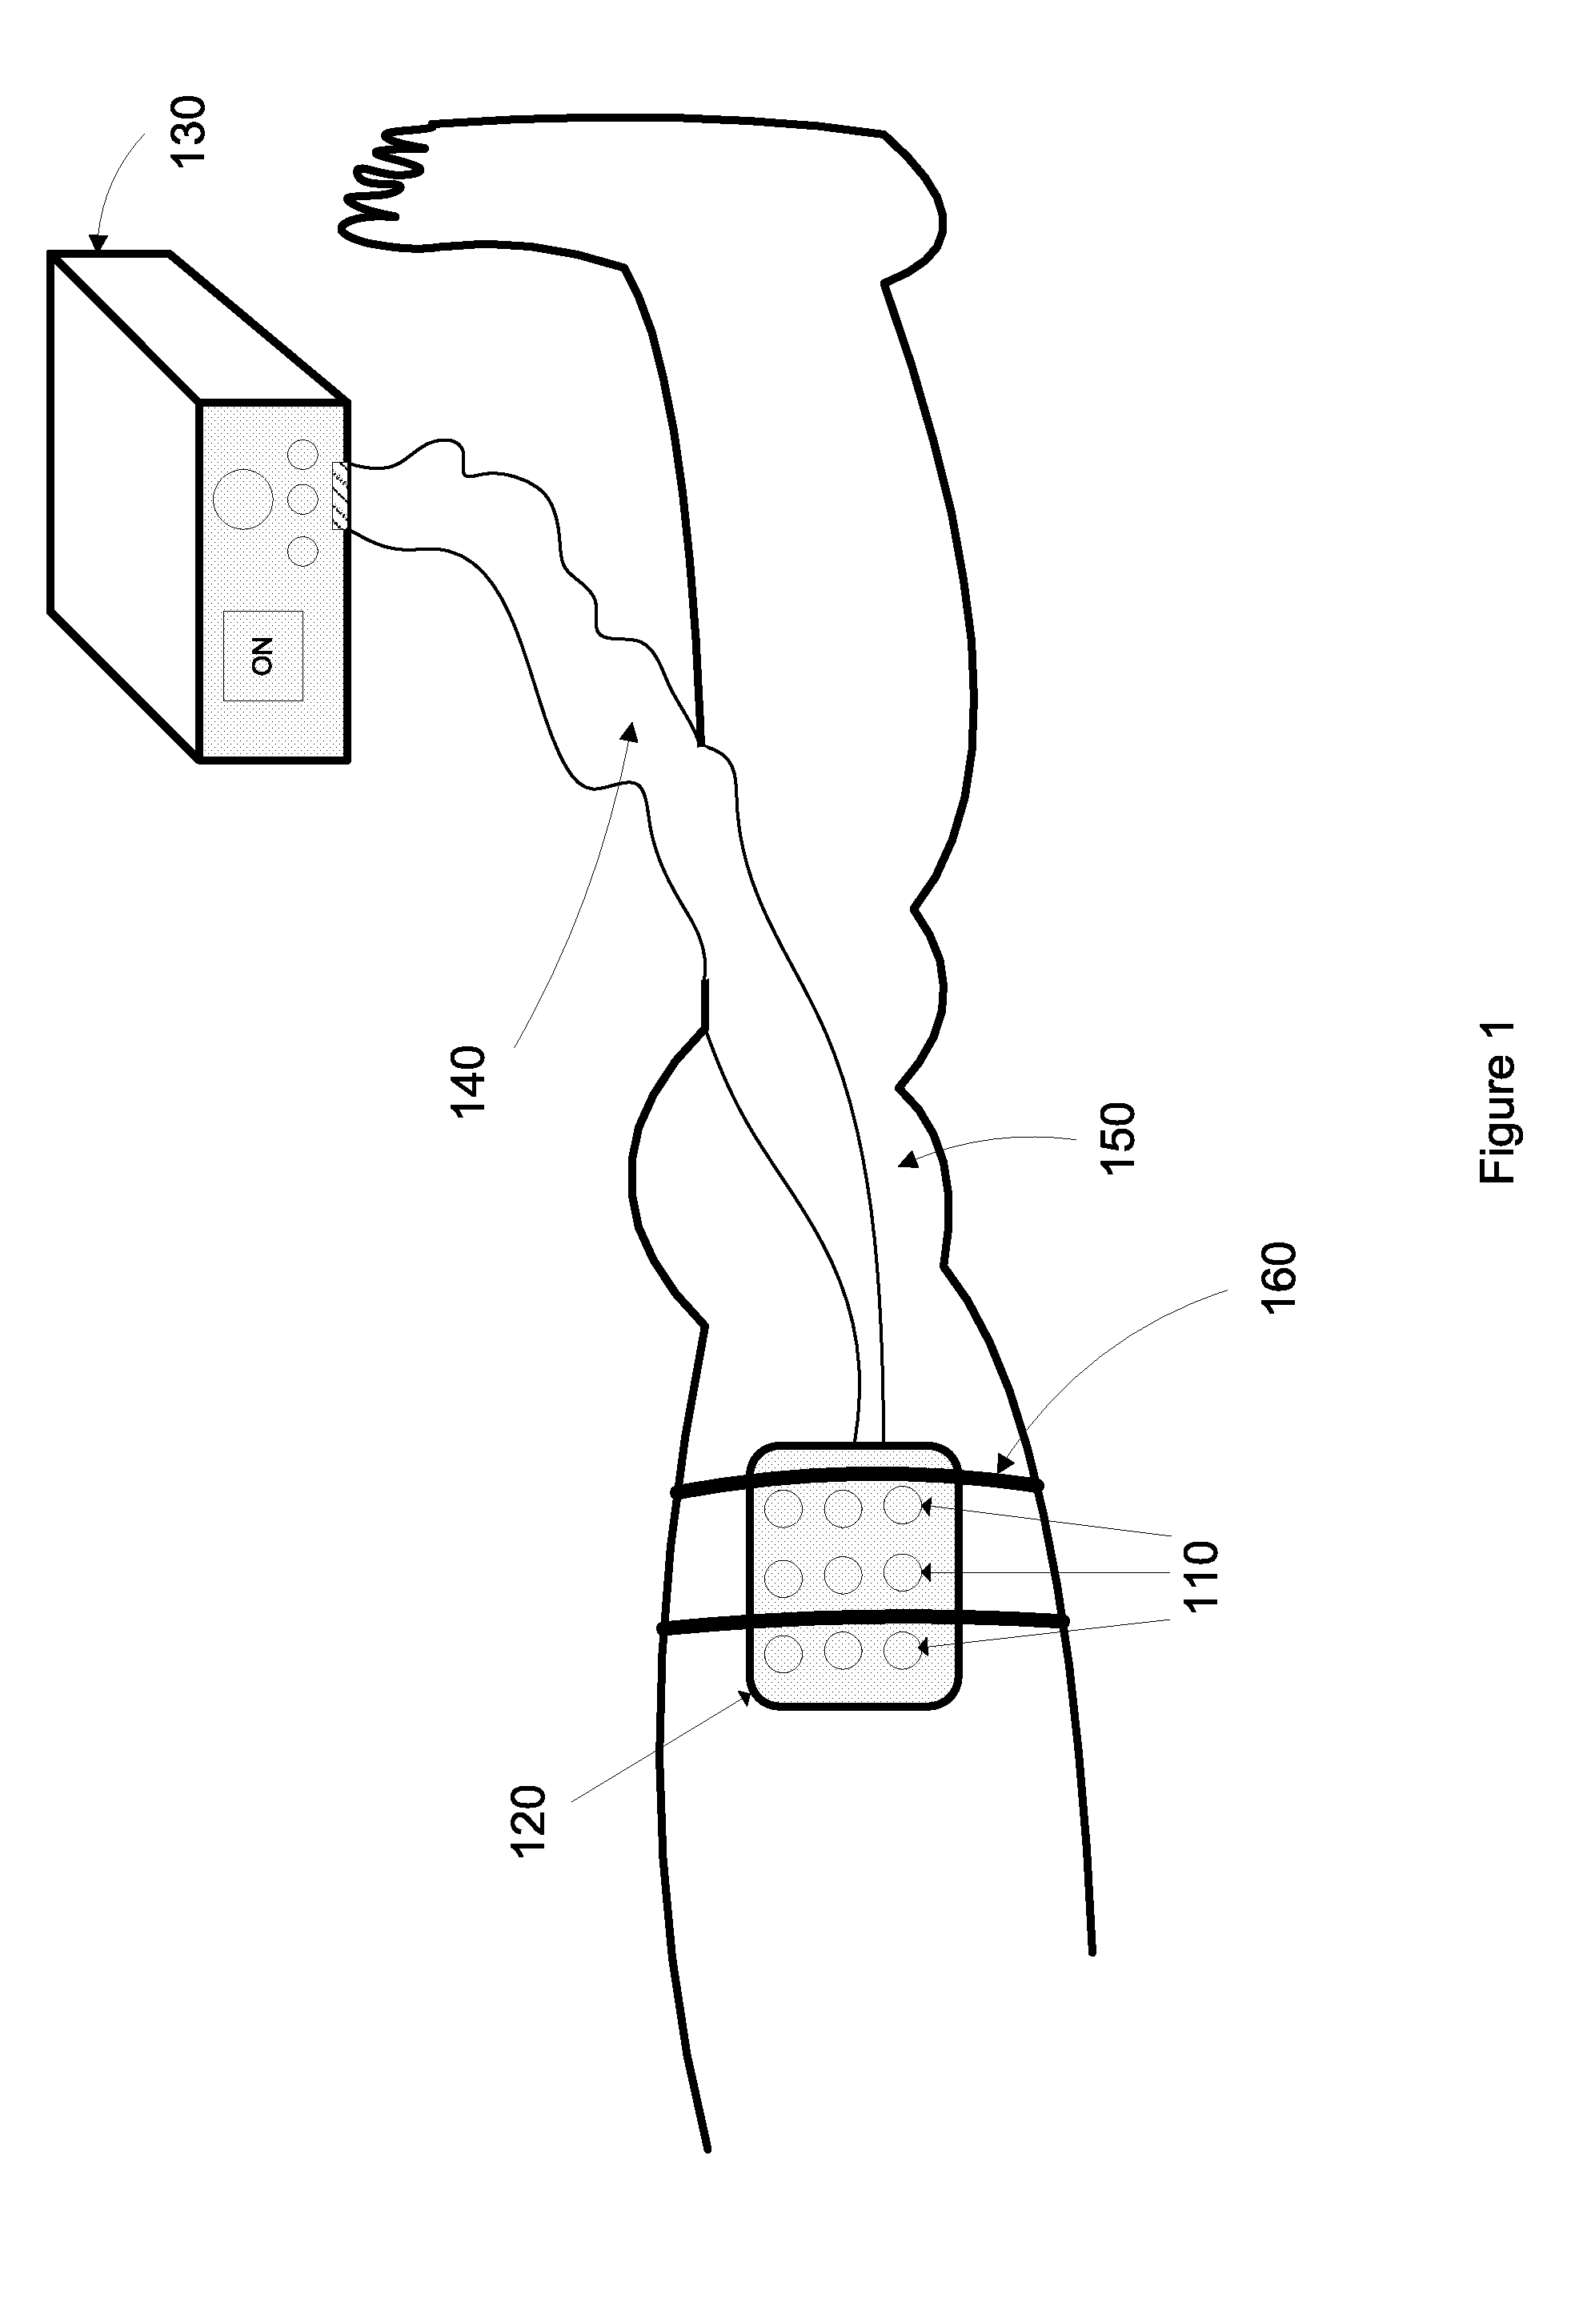 Device, system, and method to improve powered muscle stimulation performance in the presence of tissue edema